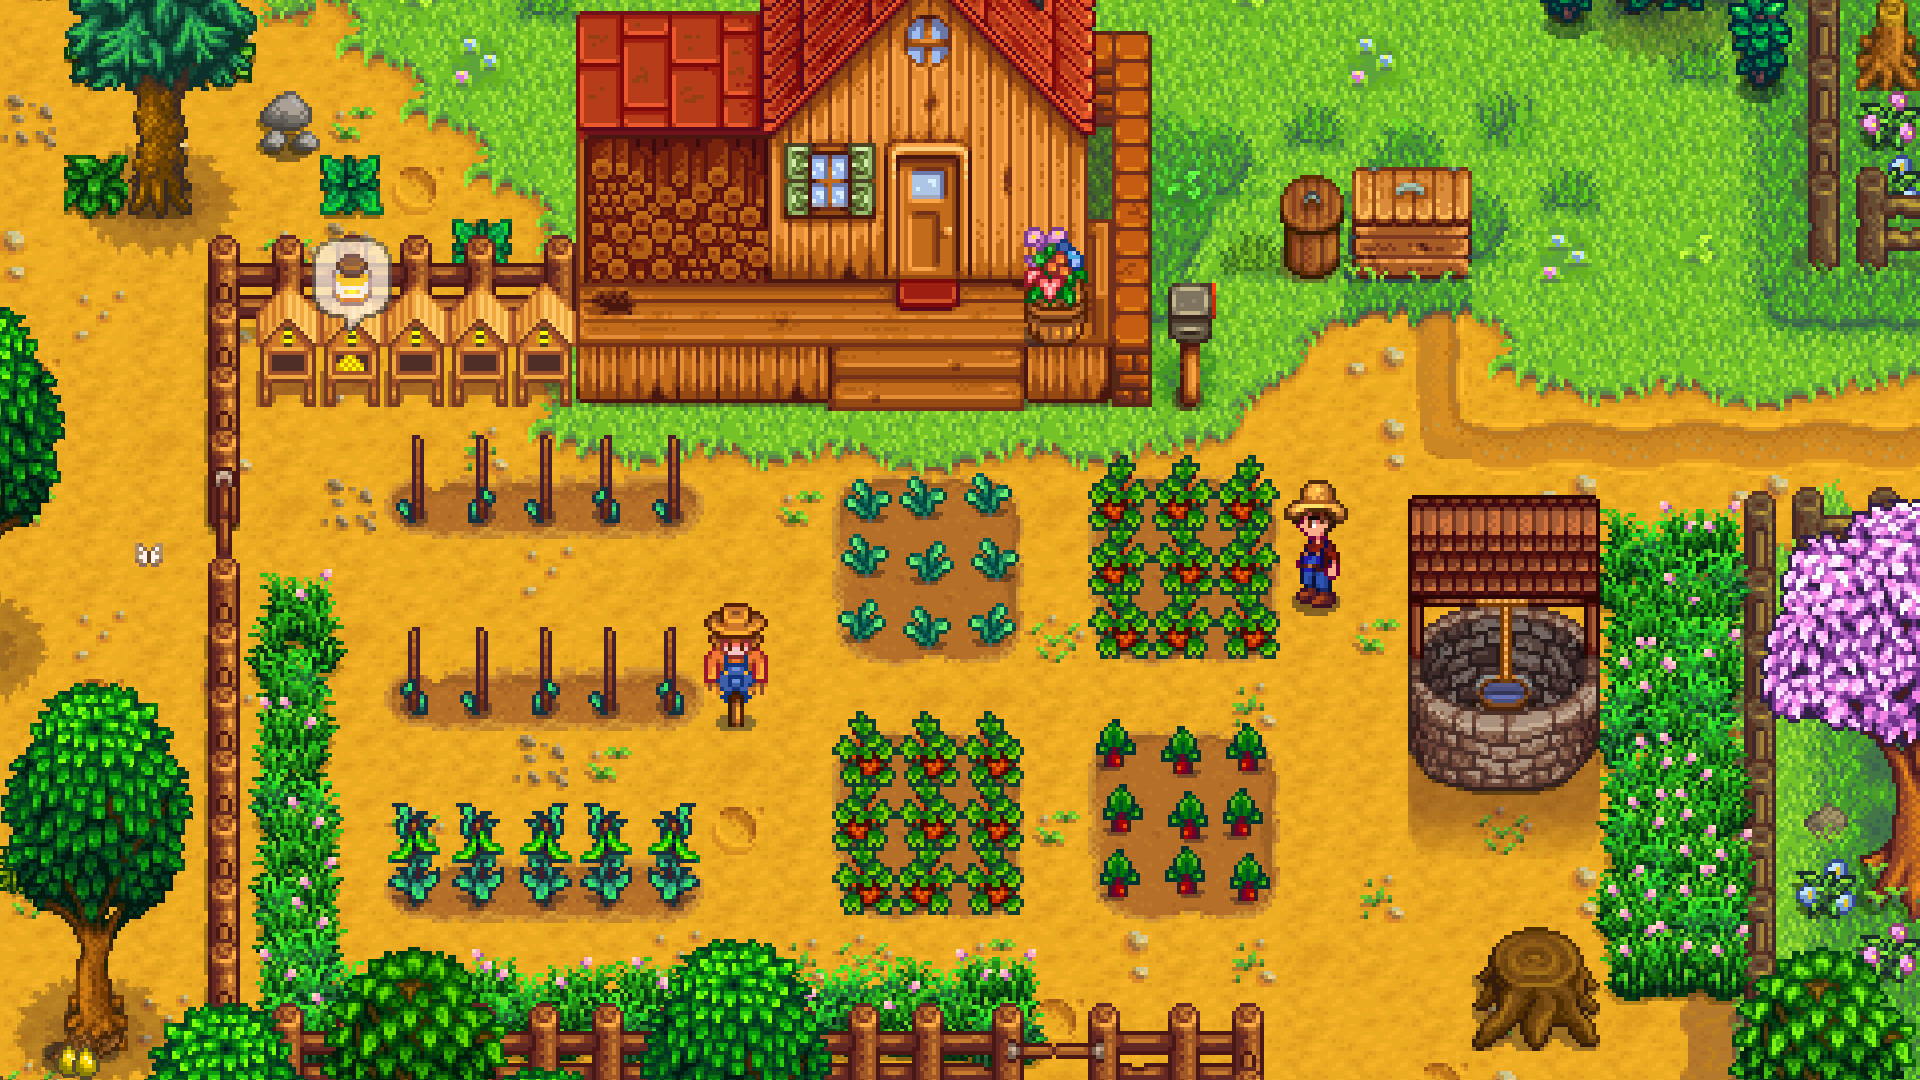 The farmstead in Stardew Valley